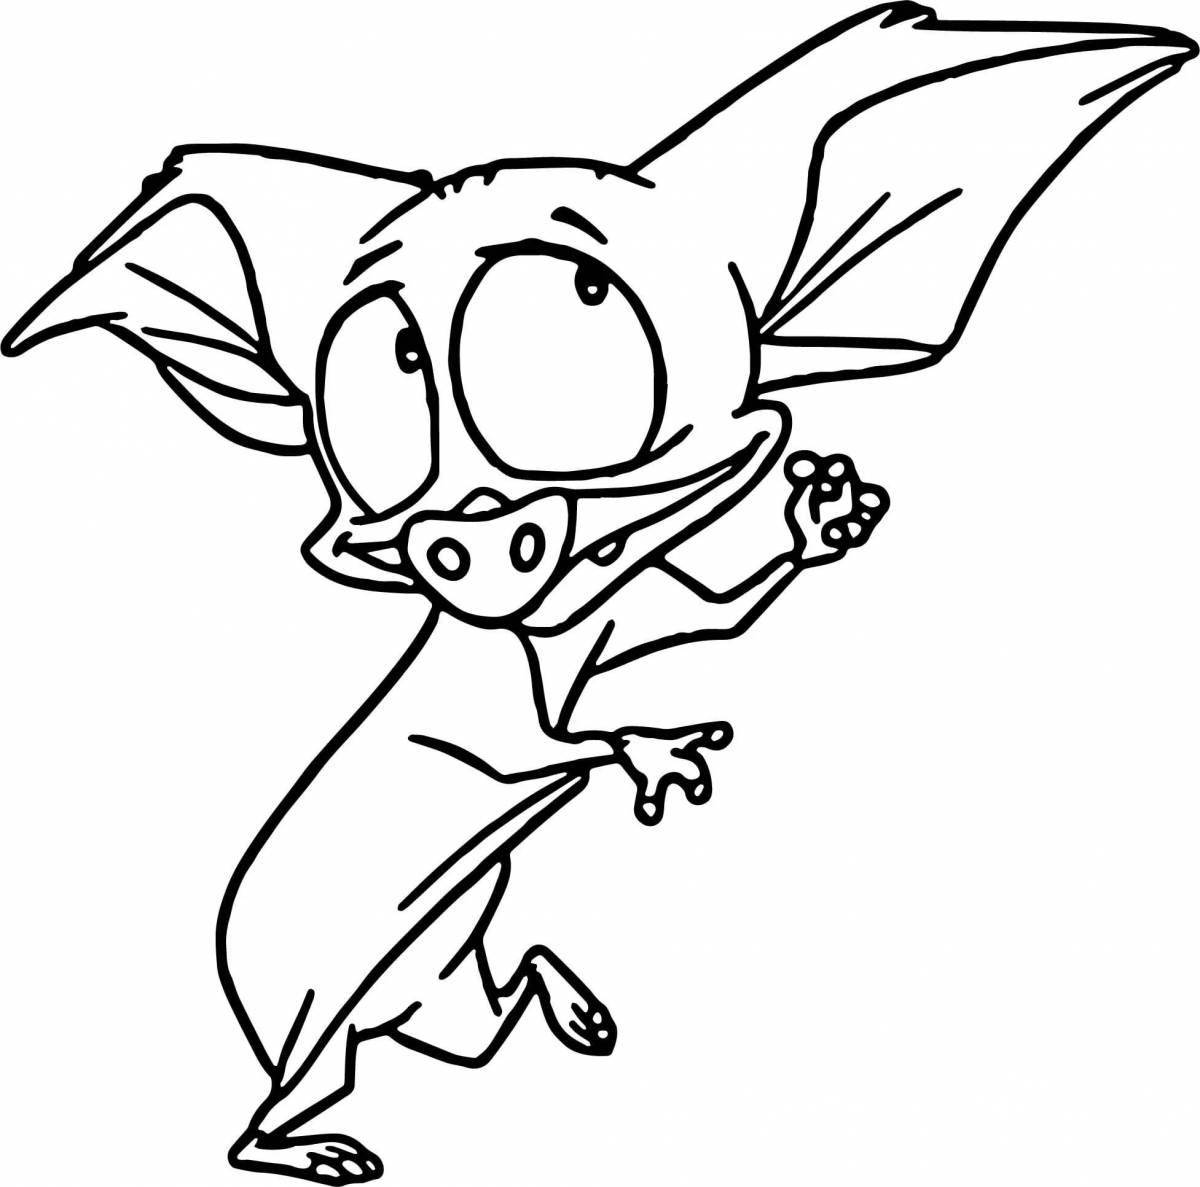 Animated flying mouse coloring page